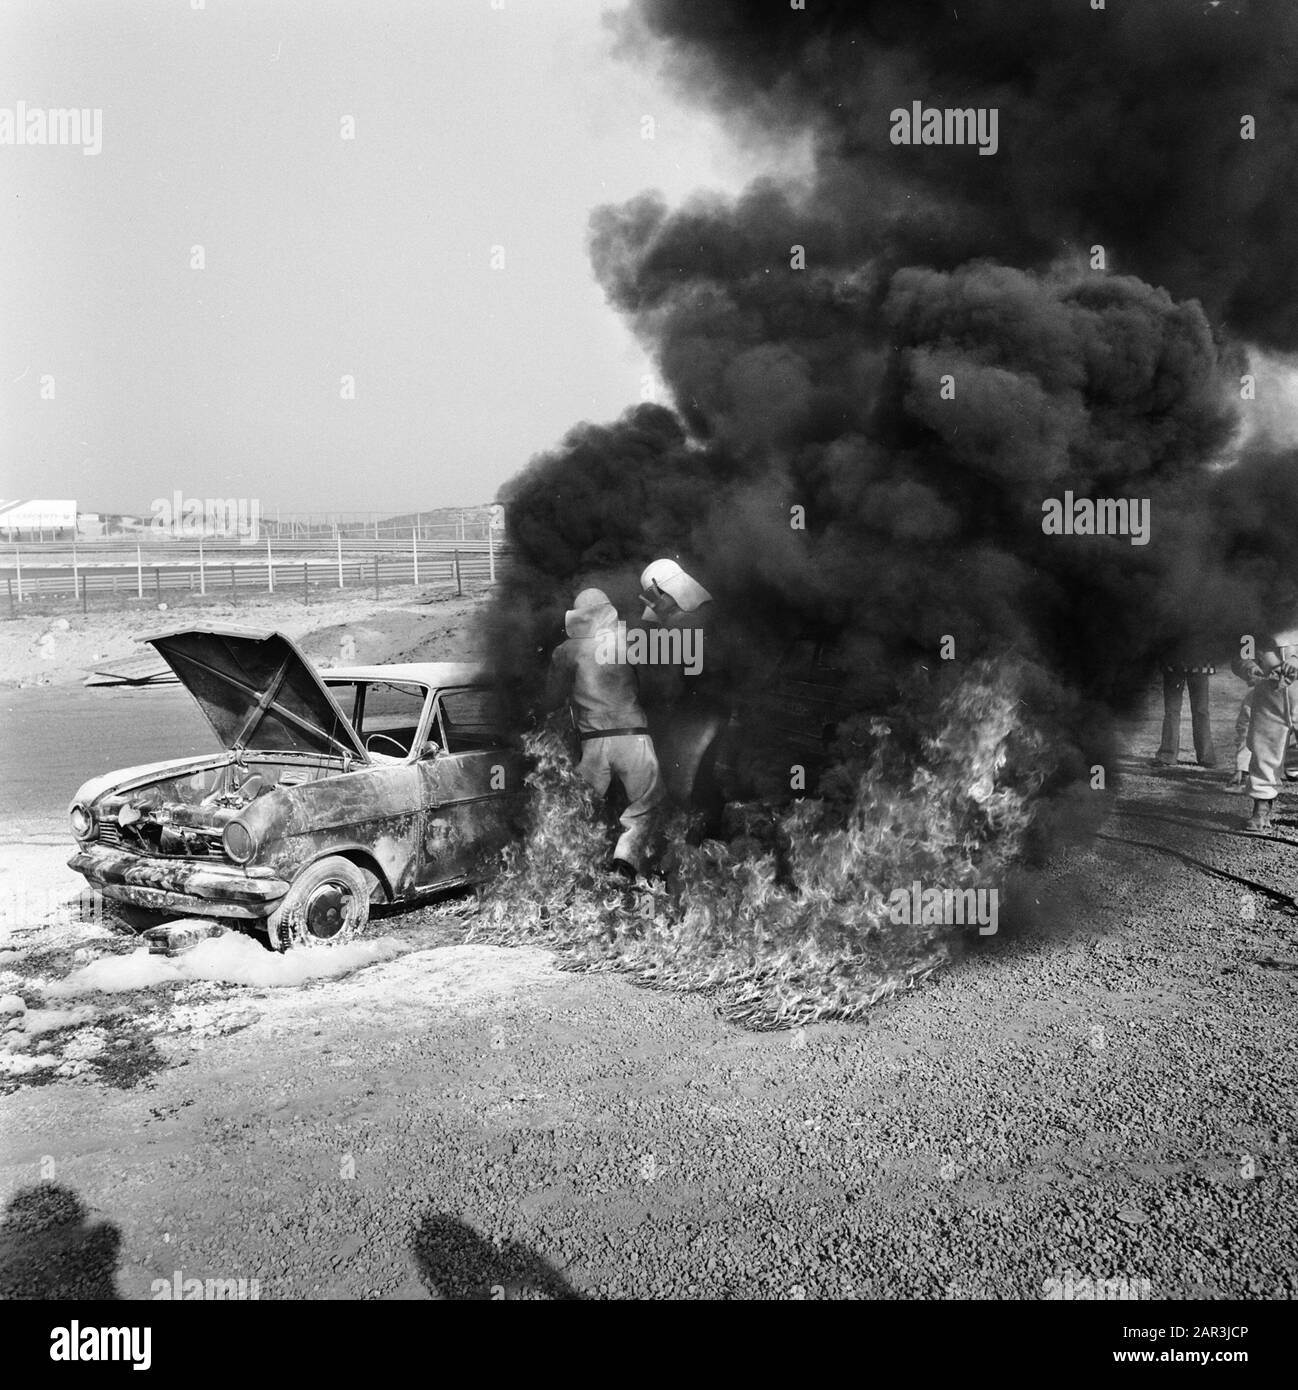 Rescue demonstration at Zandvoort circuit, volunteers with equipped BMW extinguishing burning wreck Date: 9 april 1974 Location: Noord-Holland, Zandvoort Keywords: VOLUNTERS, demonstrations Stock Photo